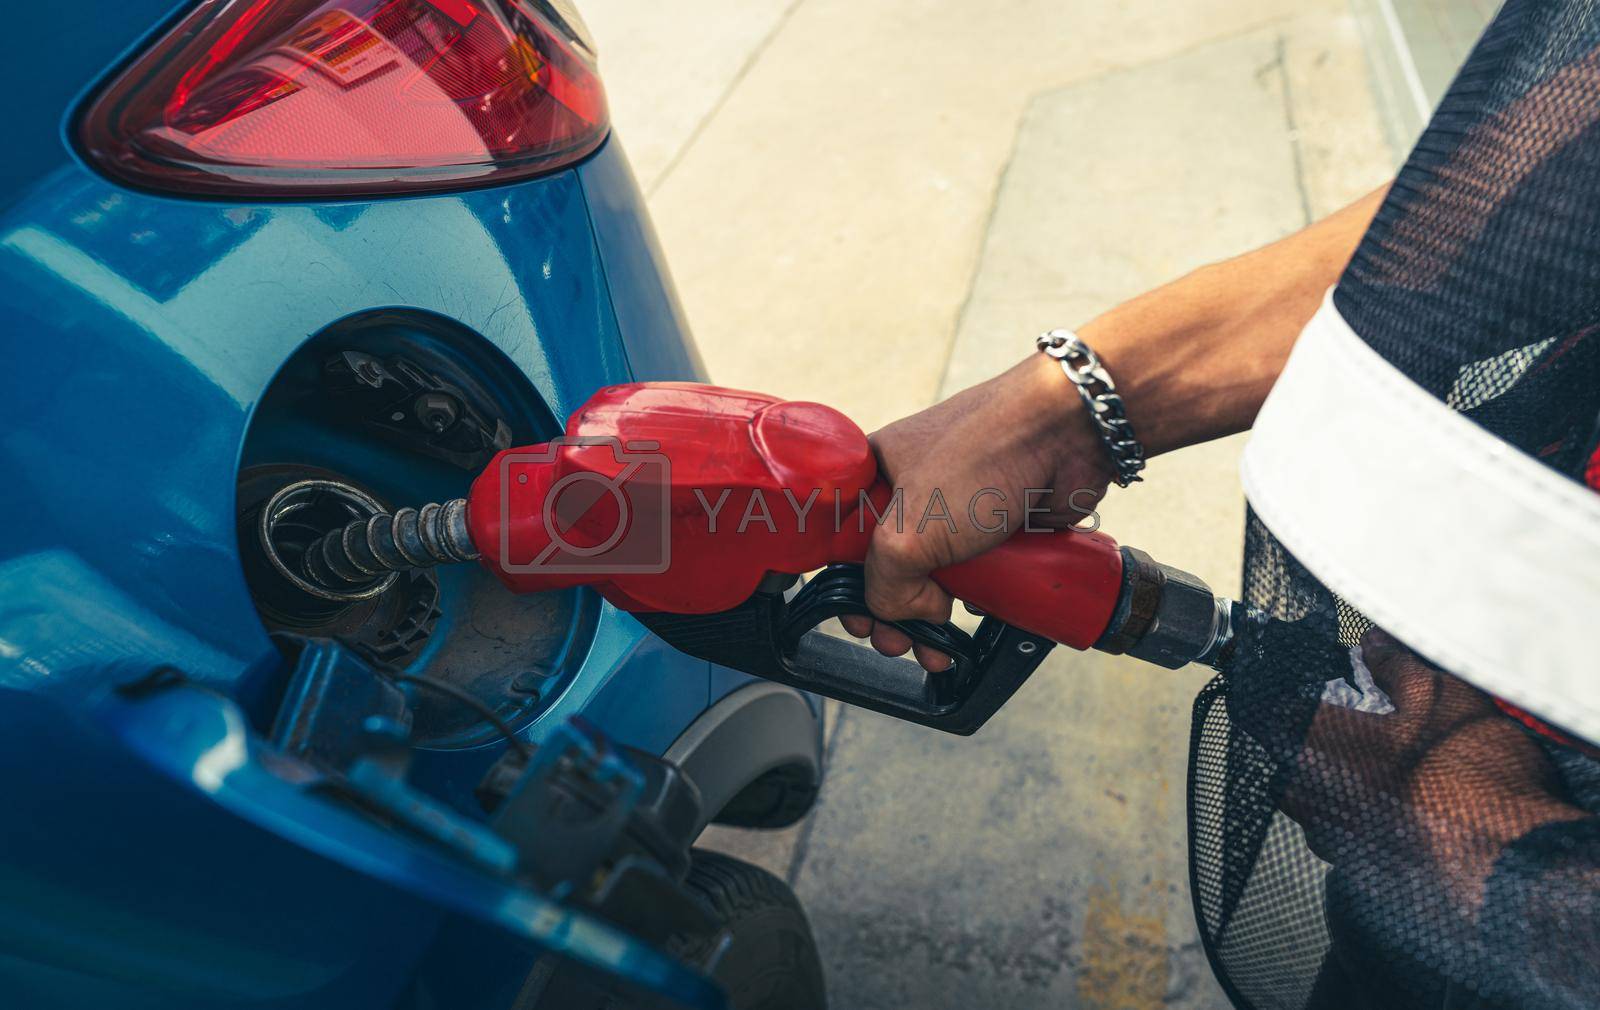 Royalty free image of Car fueling at gas station. Refuel fill up with petrol gasoline. Petrol pump filling fuel nozzle in fuel tank of car at gas station. Petrol industry and service. Petrol price and oil crisis concept. by Fahroni